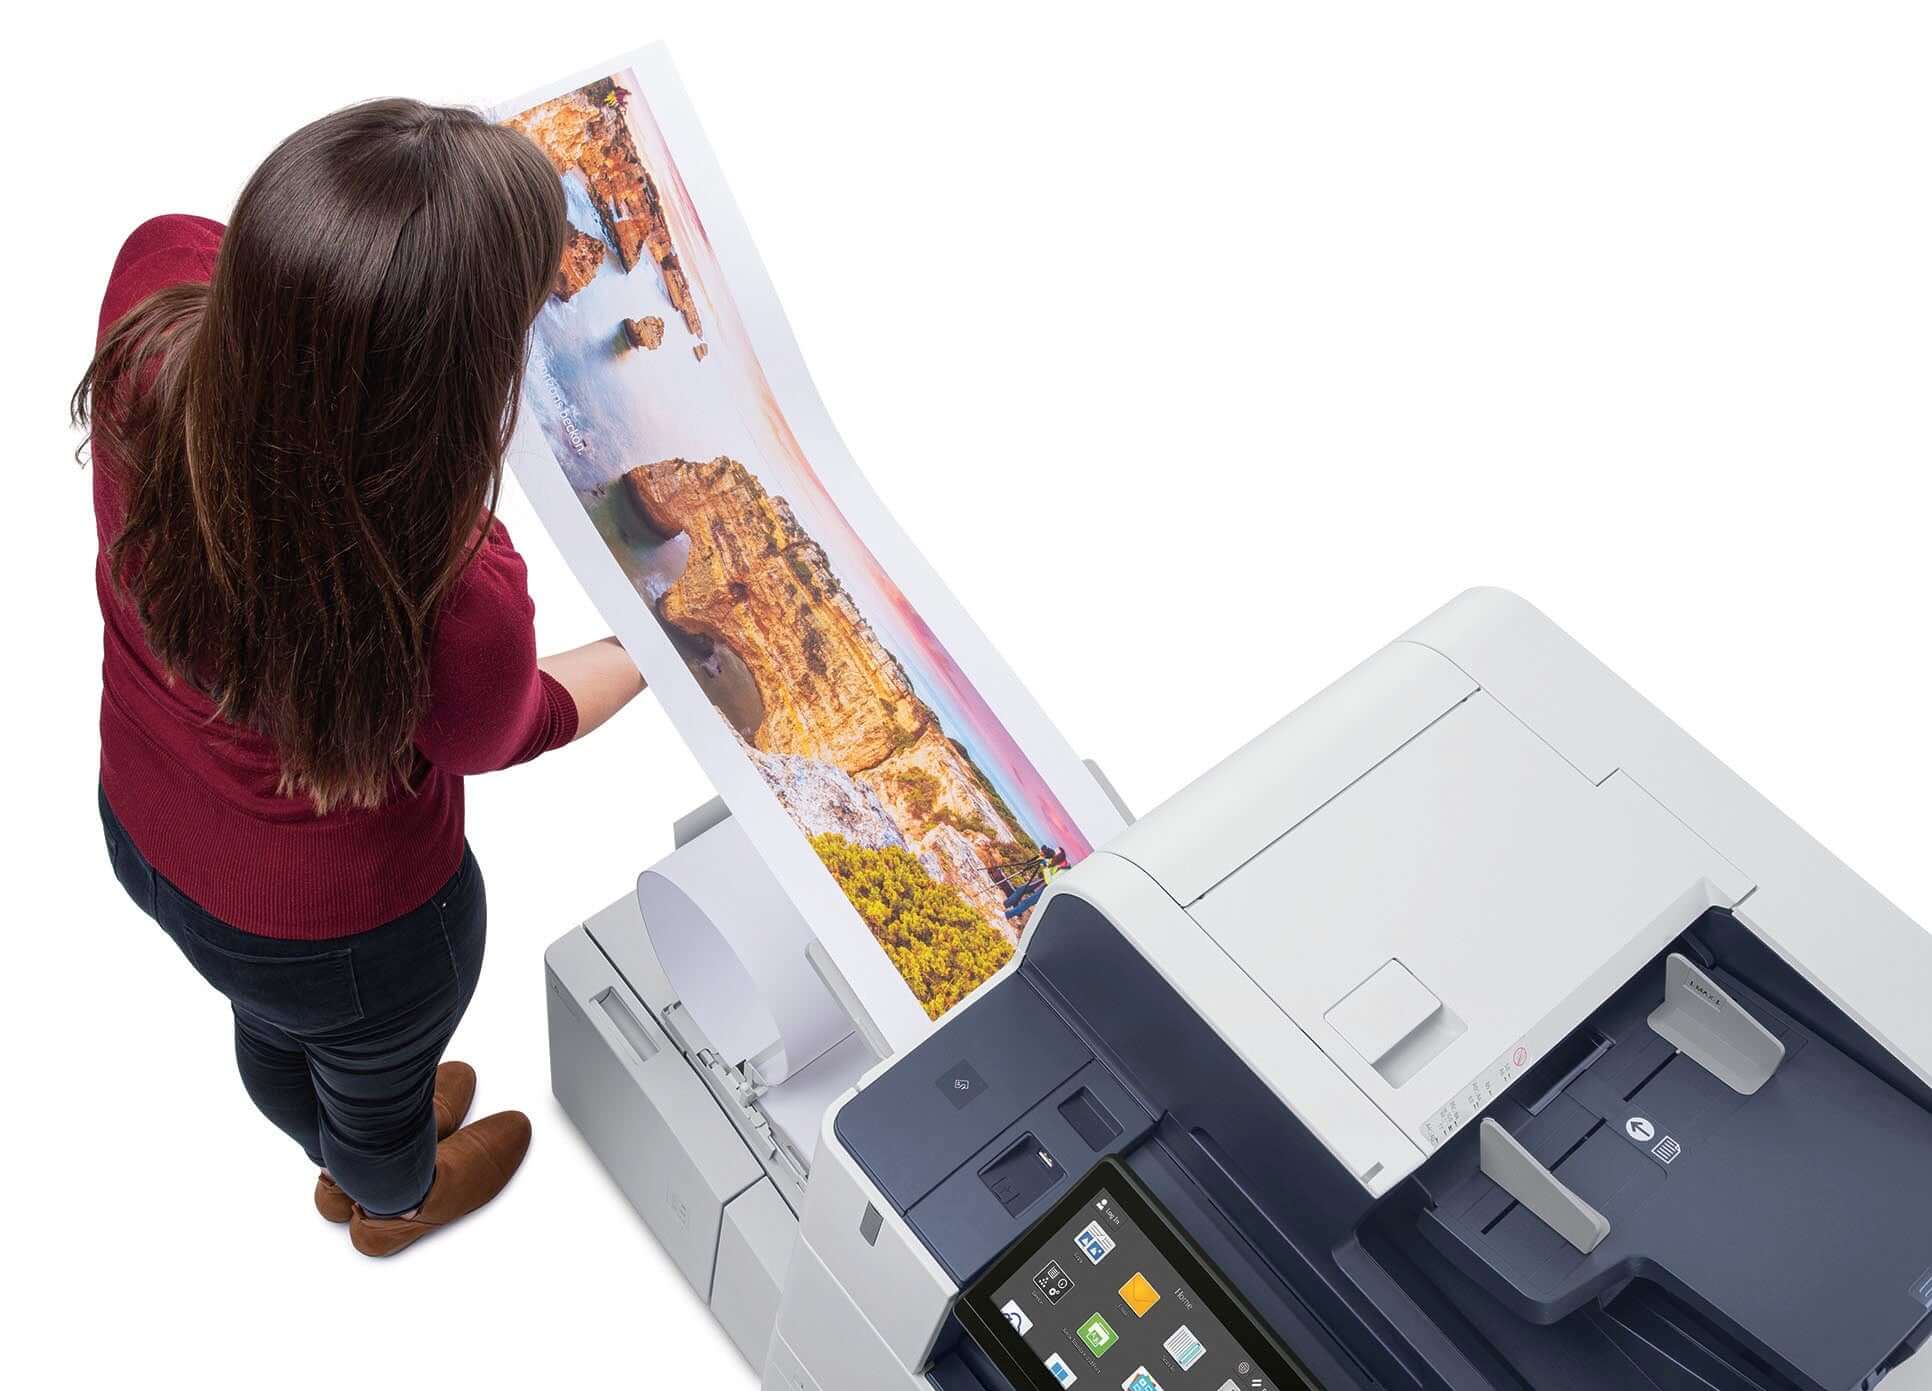 Xerox AltaLink C8135 A3 Colour Multi-Function Printer - 3,140 Paper Supply